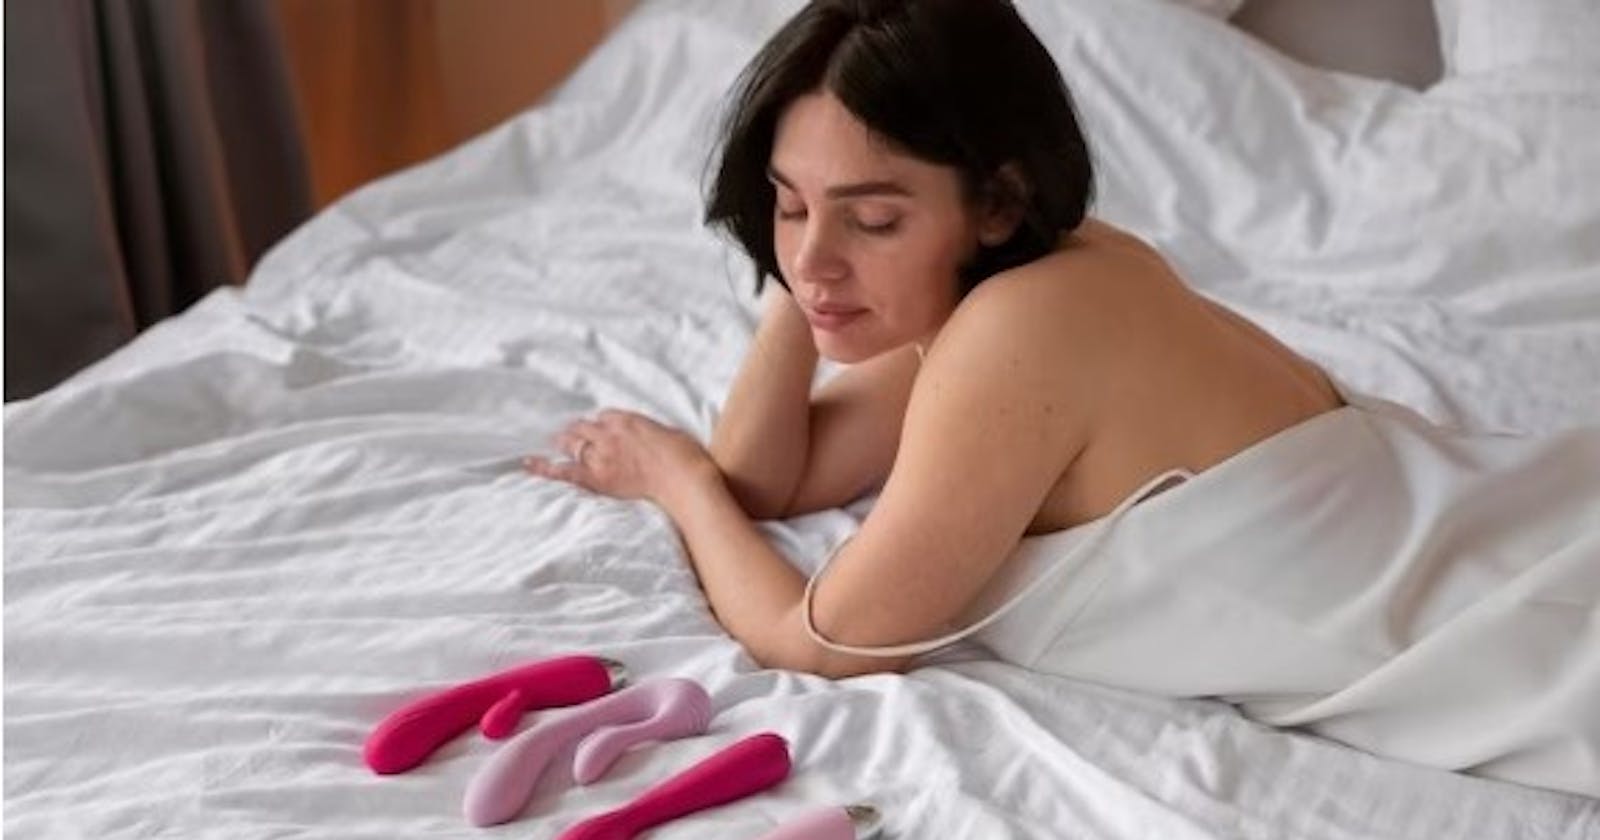 Some Interesting Sex Toys To Spice Up Your Life